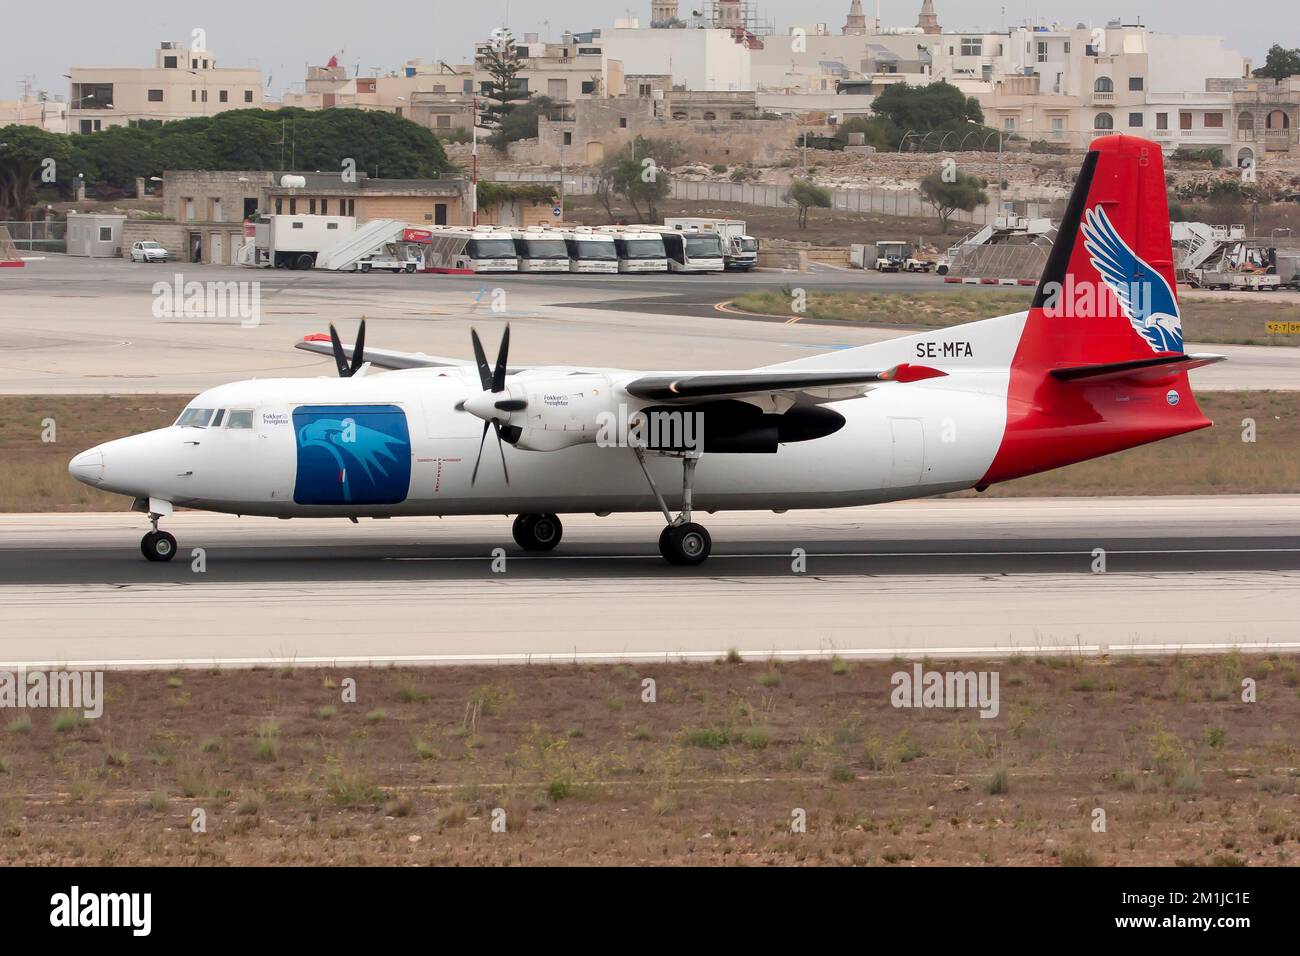 Malta. 25th Sep, 2014. An Amapola Flyg Fokker 50 freighter on the runway of Malta international airport.Amapola Flyg is a passenger and cargo airline based in Stockholm, Sweden. It operates freight services on behalf of the Swedish Post Office, Jetpak and MiniLiner from Maastricht Aachen Airport and its main base at Stockholm-Arlanda Airport. (Credit Image: © Fabrizio Gandolfo/SOPA Images via ZUMA Press Wire) Stock Photo